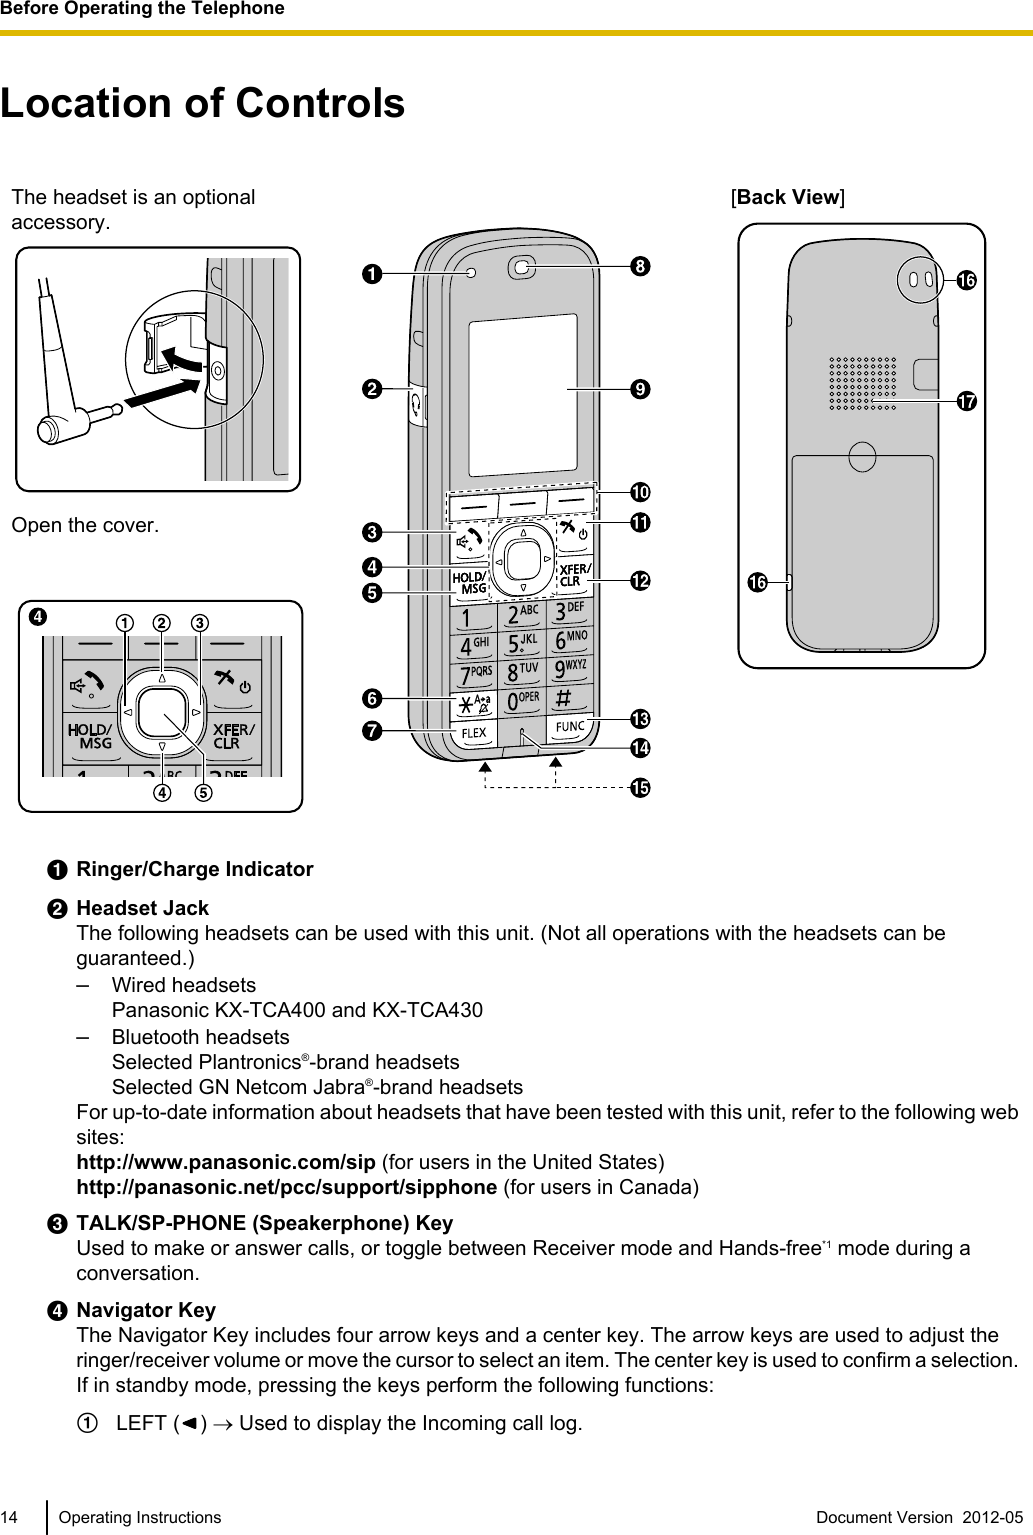 Location of ControlsThe headset is an optionalaccessory.Open the cover.[Back View]ARinger/Charge IndicatorBHeadset JackThe following headsets can be used with this unit. (Not all operations with the headsets can beguaranteed.)–Wired headsetsPanasonic KX-TCA400 and KX-TCA430–Bluetooth headsetsSelected Plantronics®-brand headsetsSelected GN Netcom Jabra®-brand headsetsFor up-to-date information about headsets that have been tested with this unit, refer to the following websites:http://www.panasonic.com/sip (for users in the United States)http://panasonic.net/pcc/support/sipphone (for users in Canada)CTALK/SP-PHONE (Speakerphone) KeyUsed to make or answer calls, or toggle between Receiver mode and Hands-free*1 mode during aconversation.DNavigator KeyThe Navigator Key includes four arrow keys and a center key. The arrow keys are used to adjust theringer/receiver volume or move the cursor to select an item. The center key is used to confirm a selection.If in standby mode, pressing the keys perform the following functions:ALEFT ( ) ® Used to display the Incoming call log.14 Operating Instructions Document Version  2012-05  Before Operating the Telephone